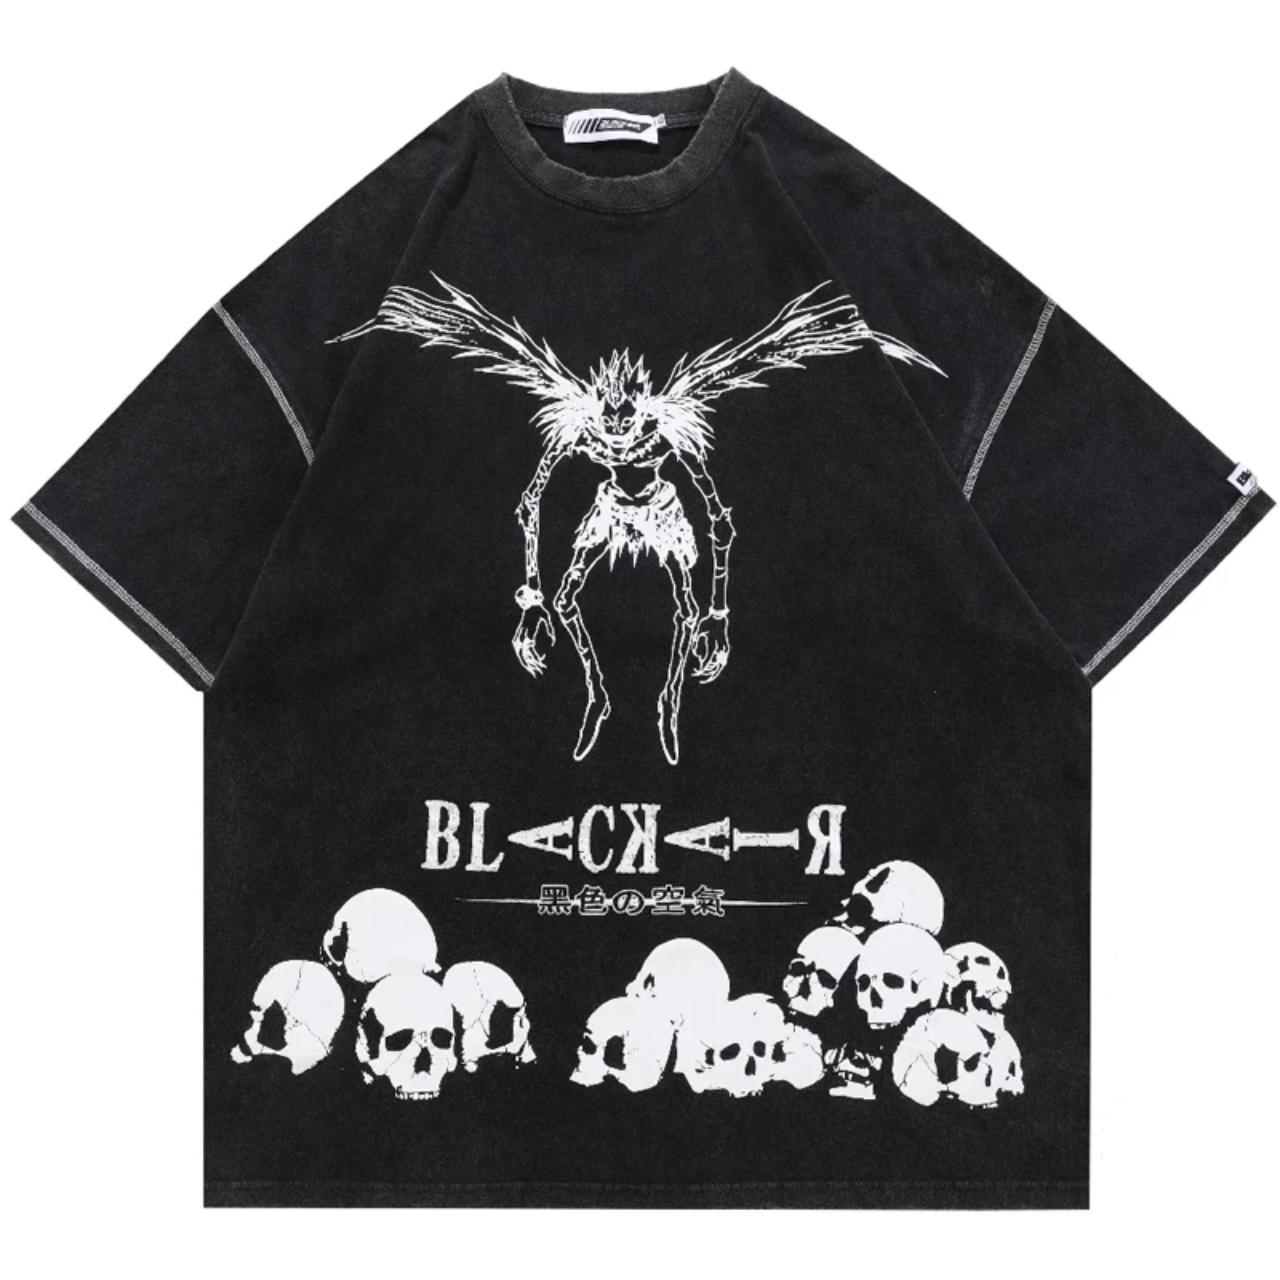 Death Note Mall Goth Misa Patches T-Shirt XL Black